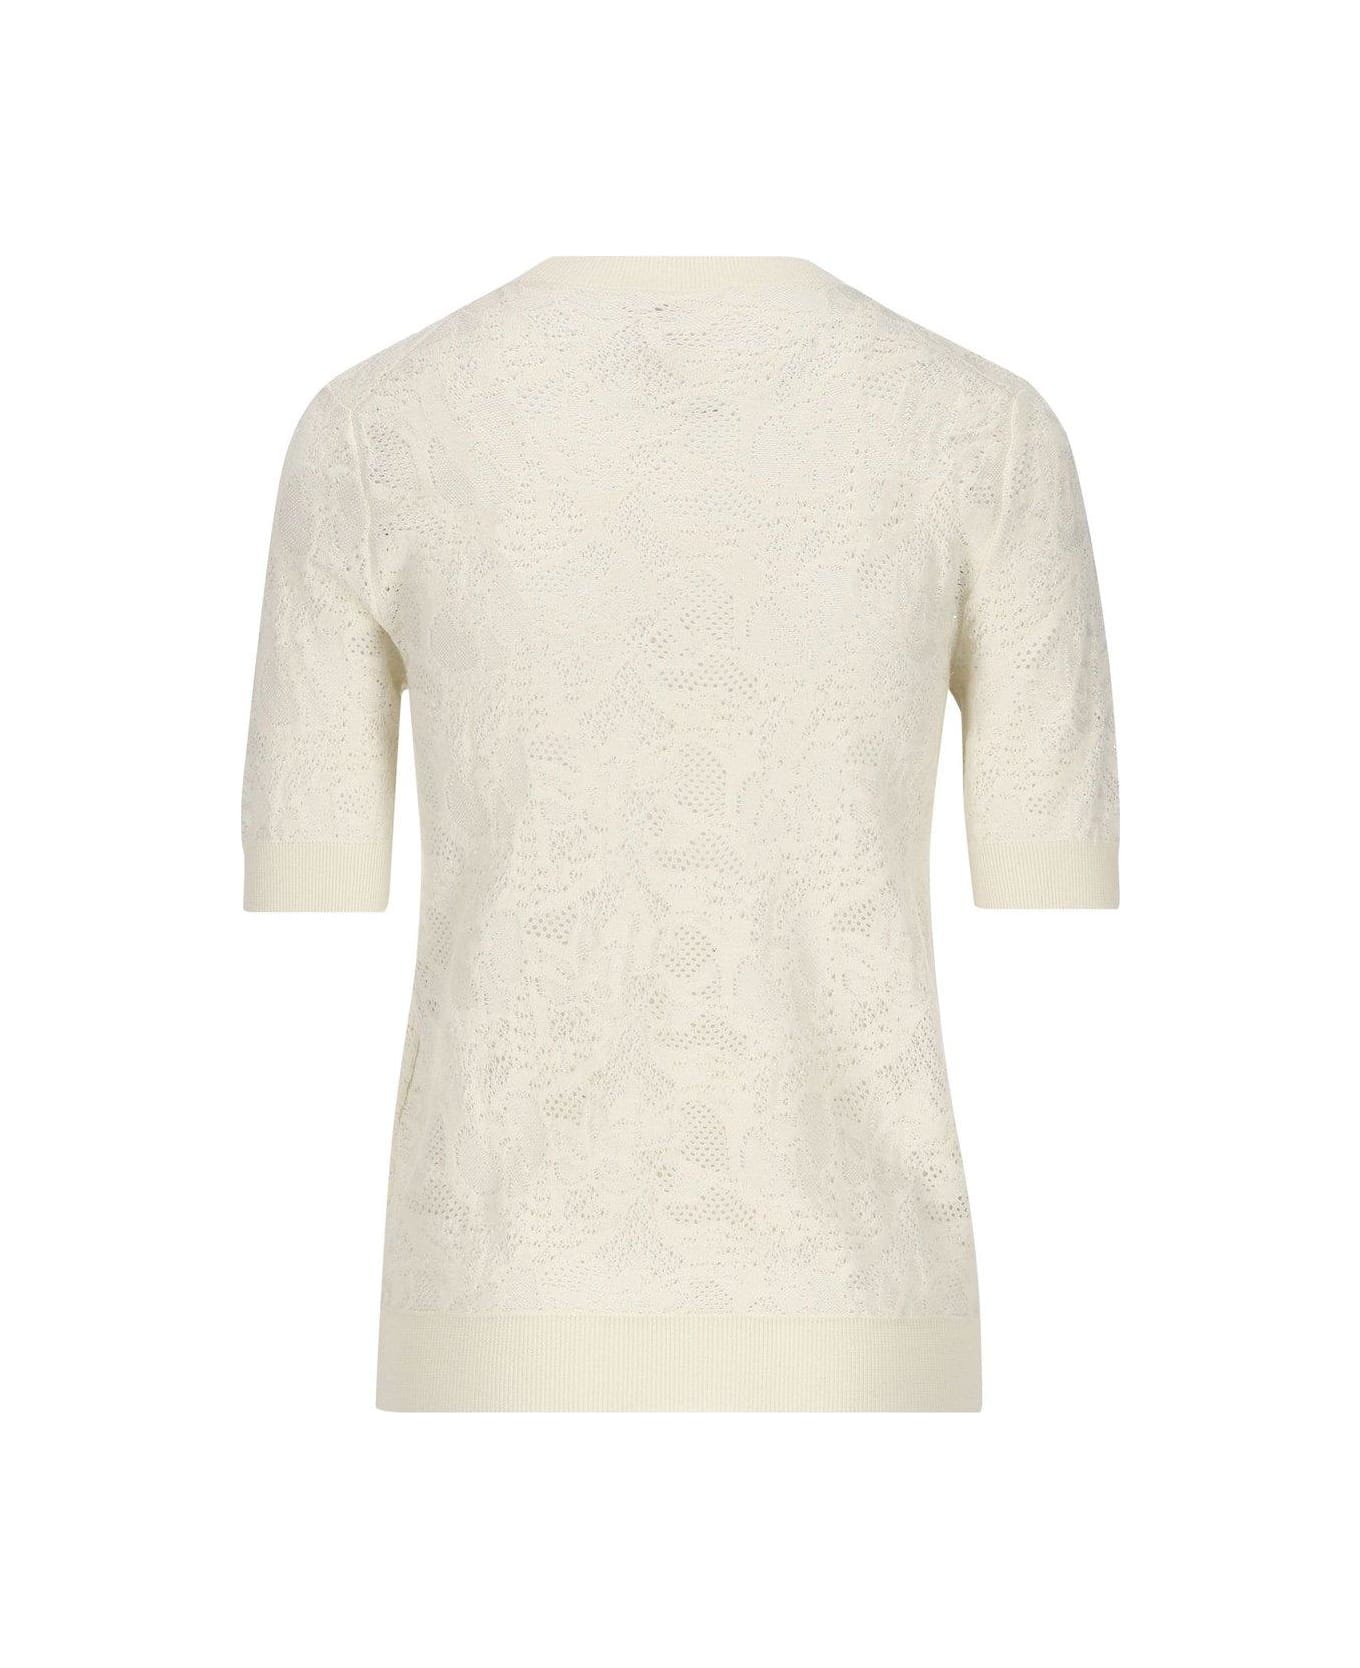 Chloé Guipure Effect Top - White トップス